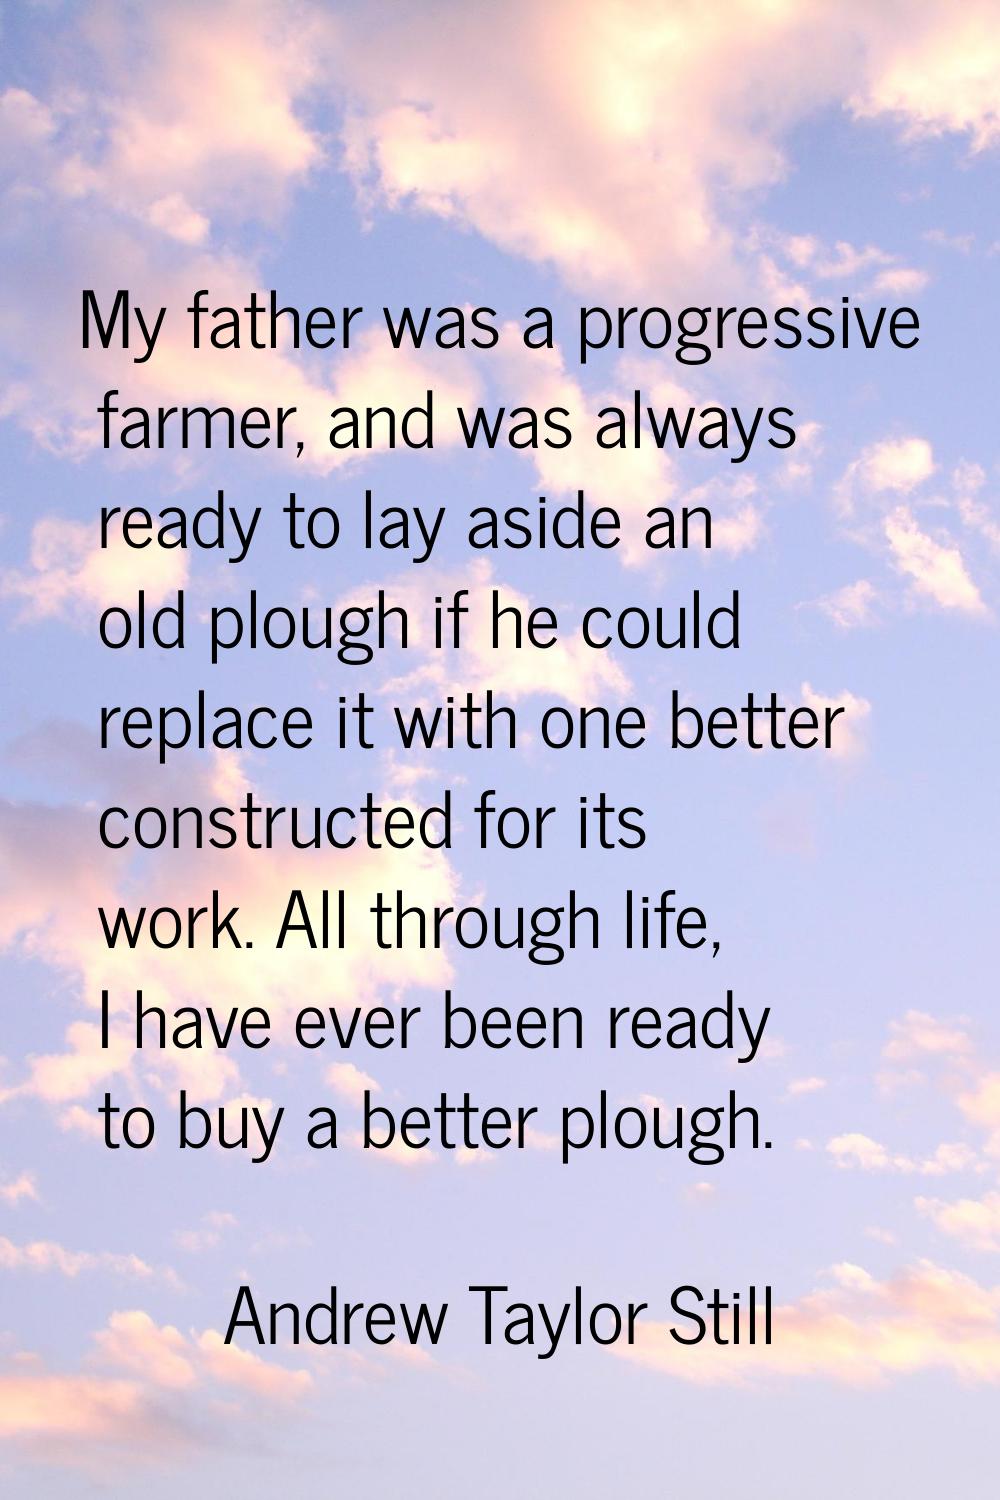 My father was a progressive farmer, and was always ready to lay aside an old plough if he could rep